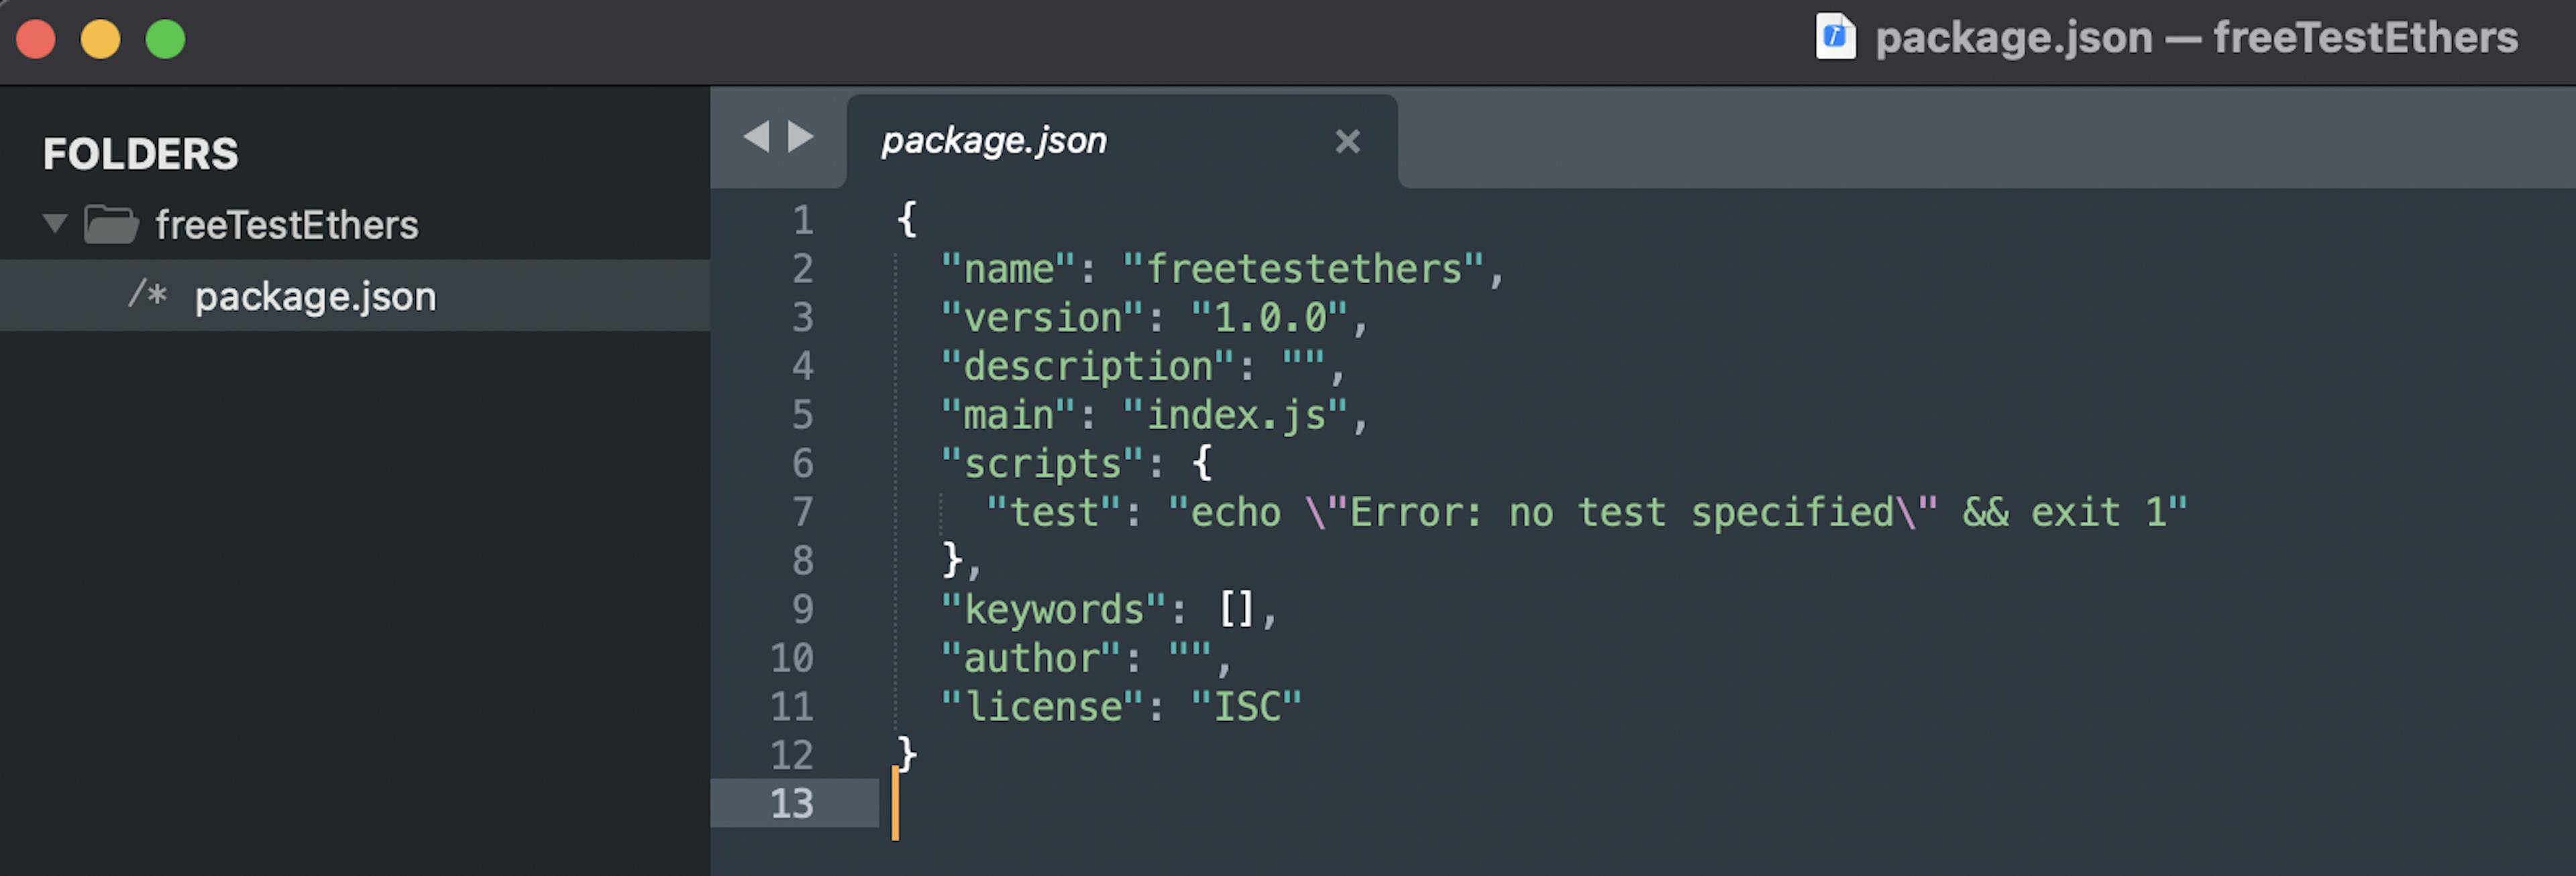 arquivo package.json